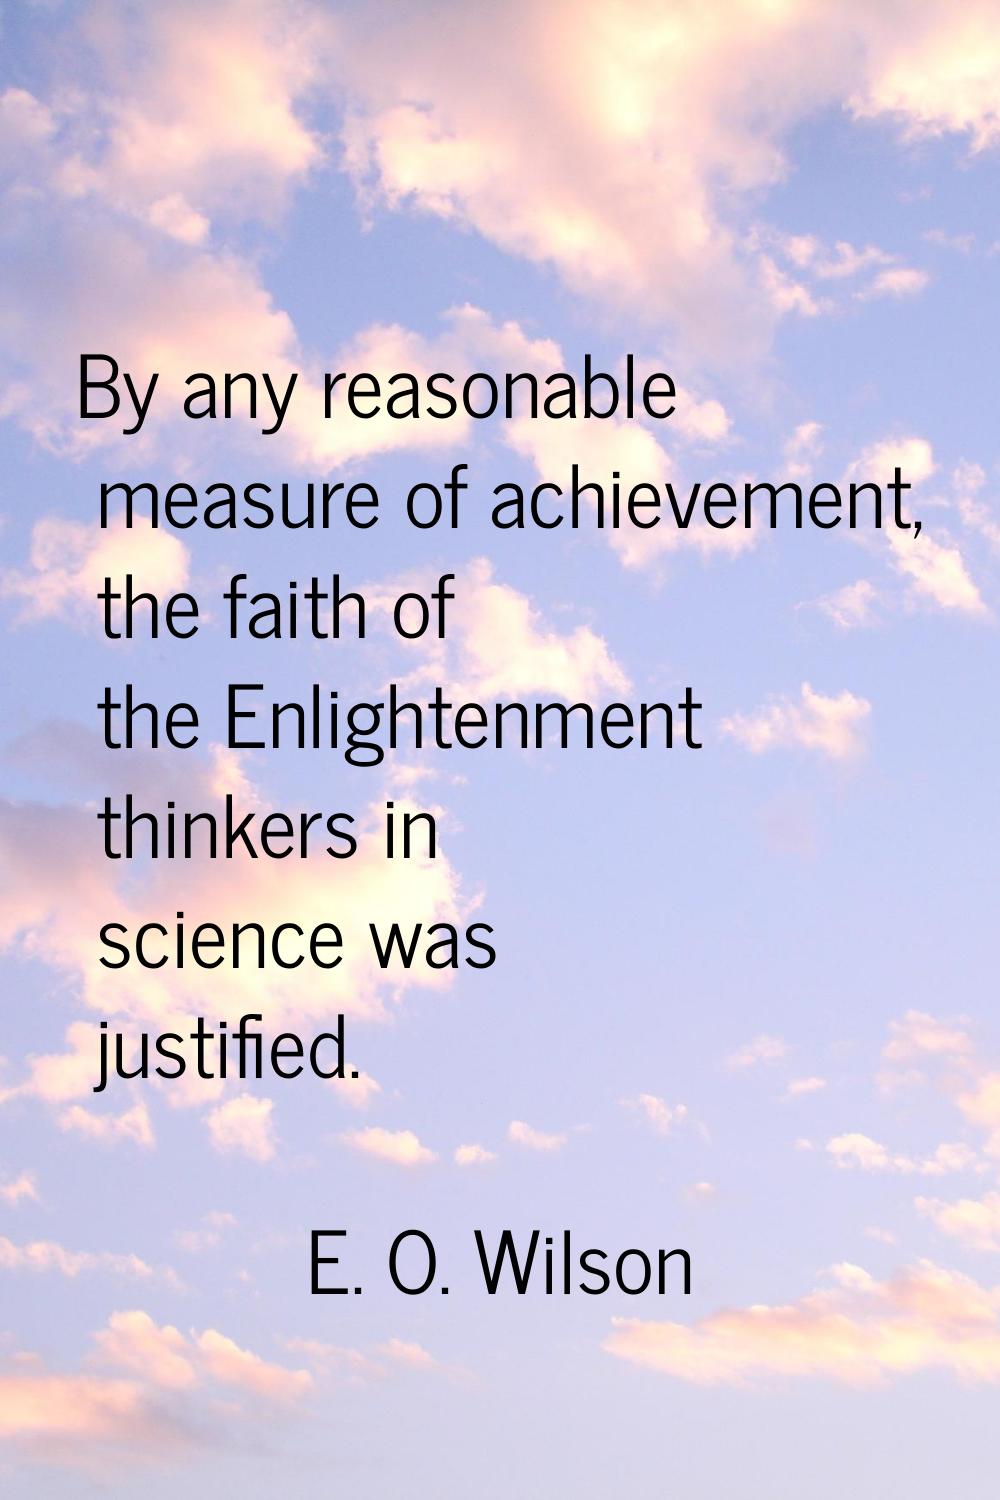 By any reasonable measure of achievement, the faith of the Enlightenment thinkers in science was ju